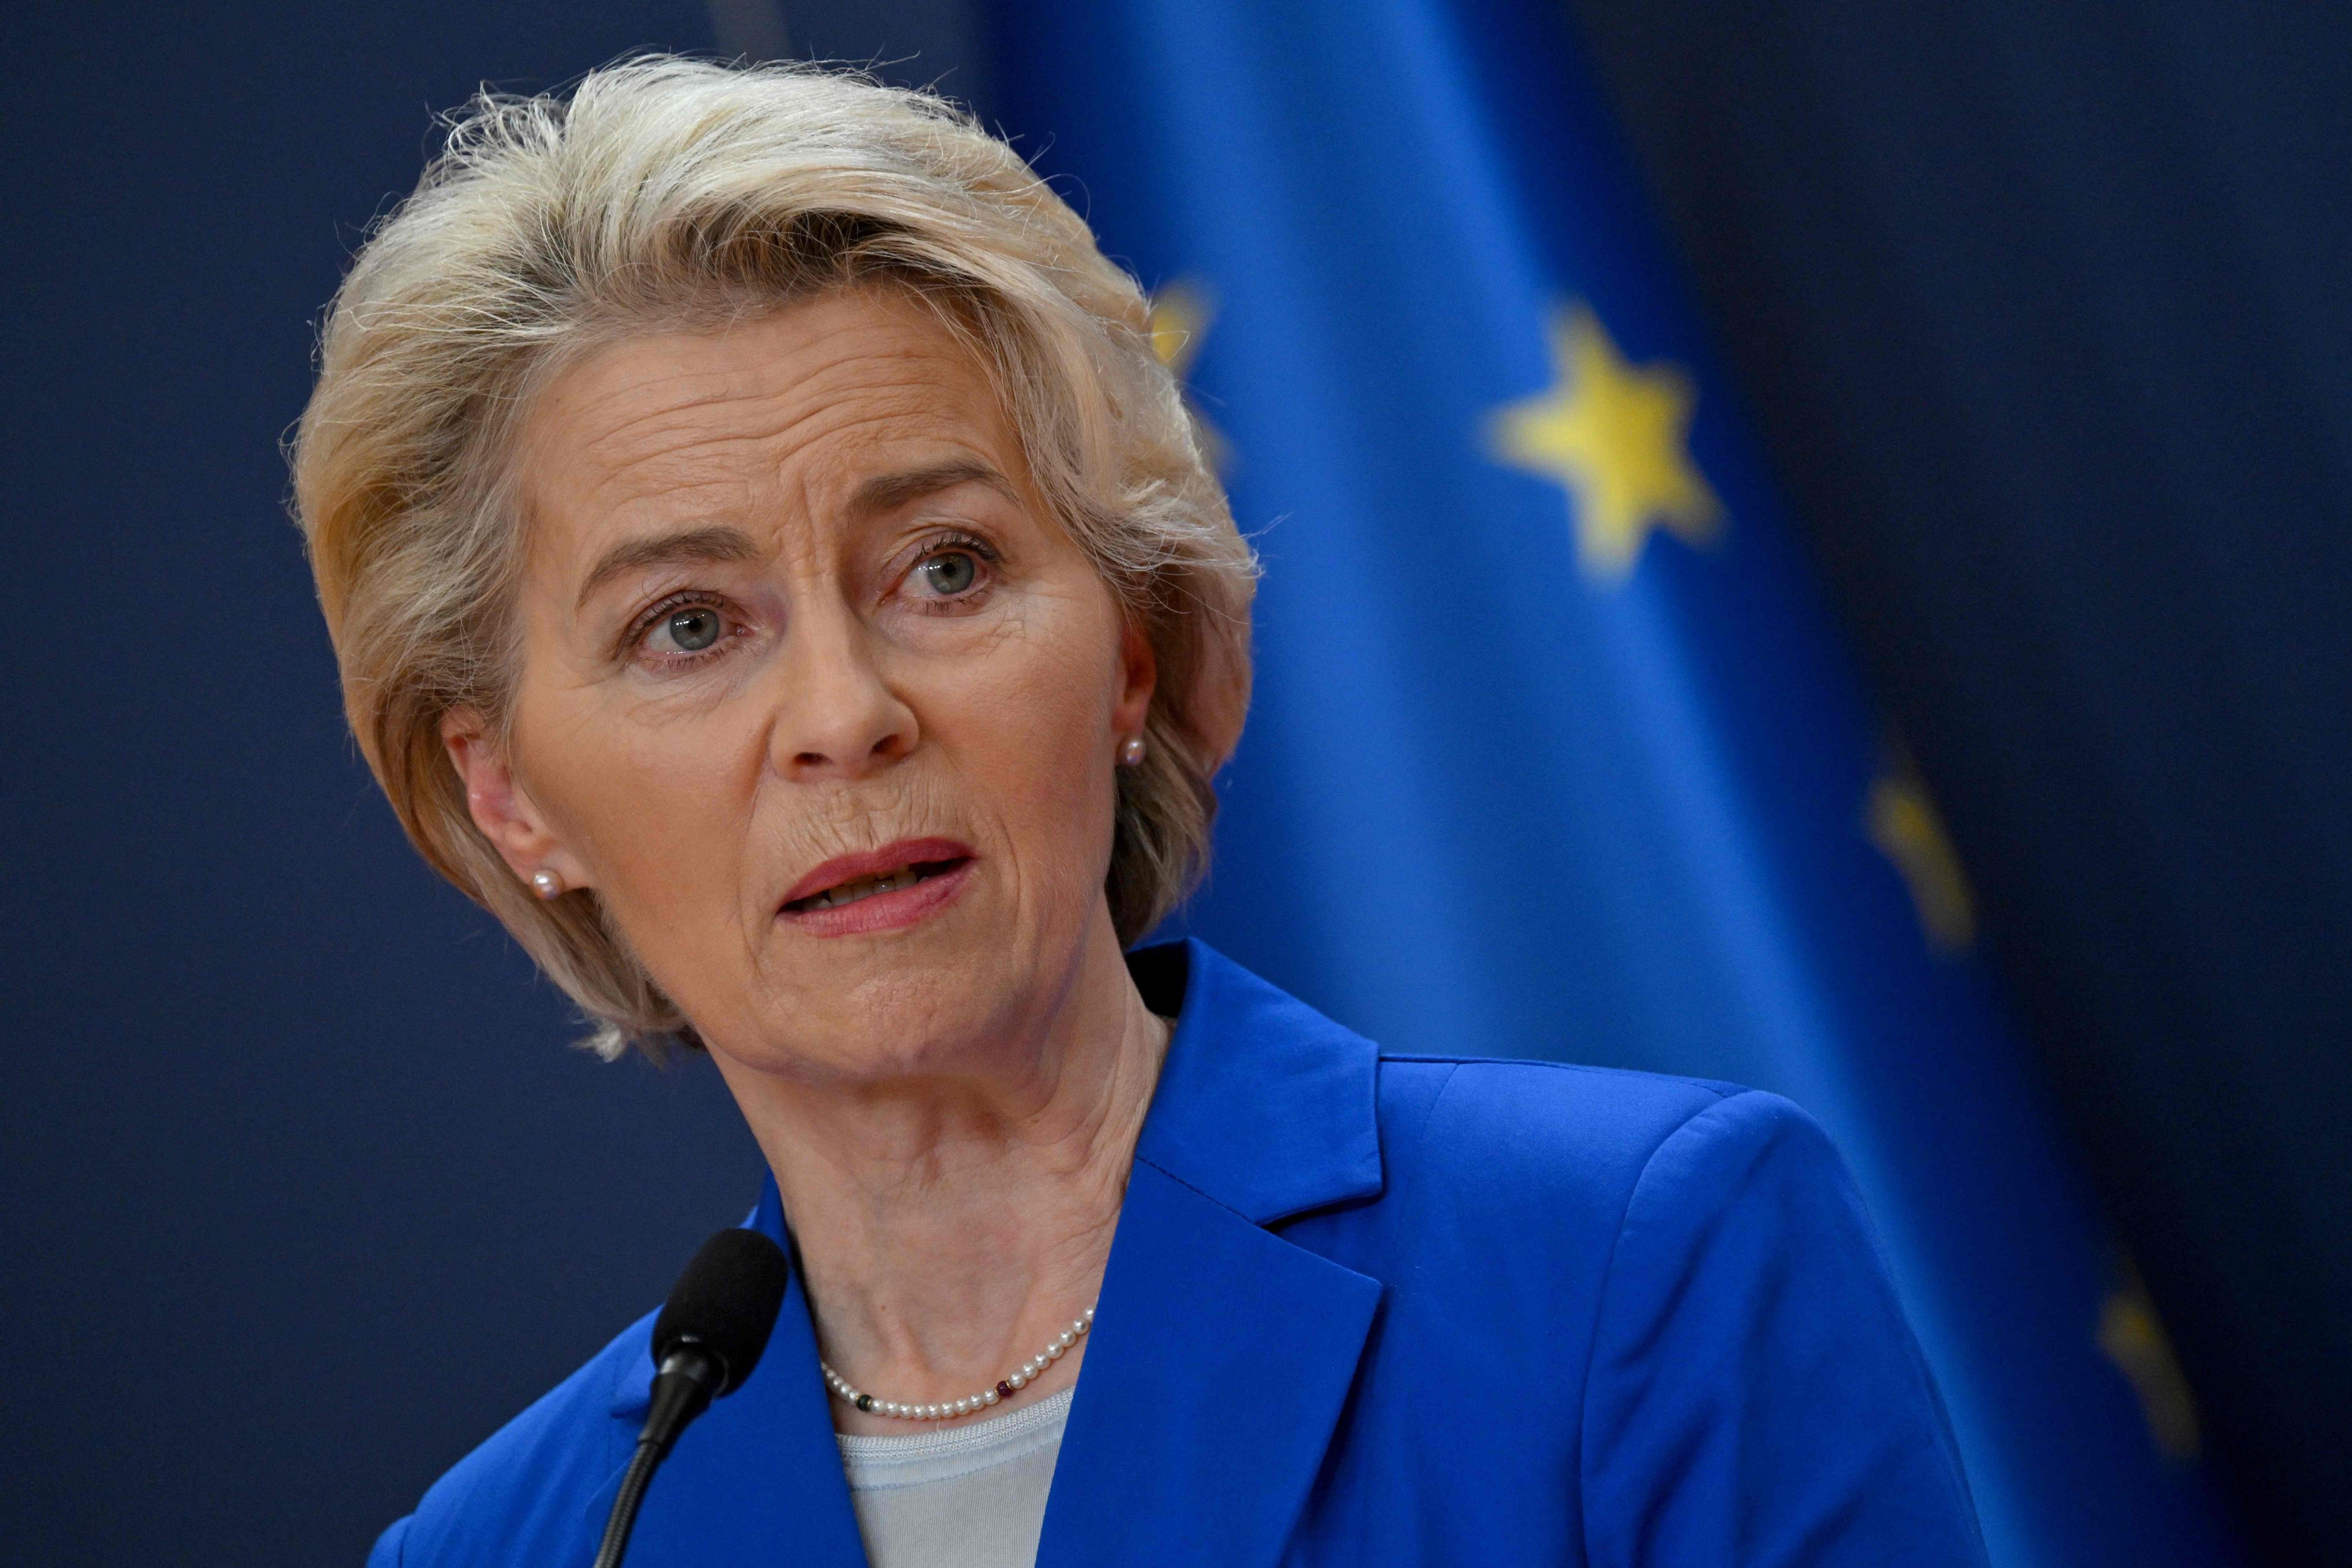 European Commission President Ursula von der Leyen warned: “We must recognise that there is an explicit element of rivalry in our relationship”. Photo: AFP